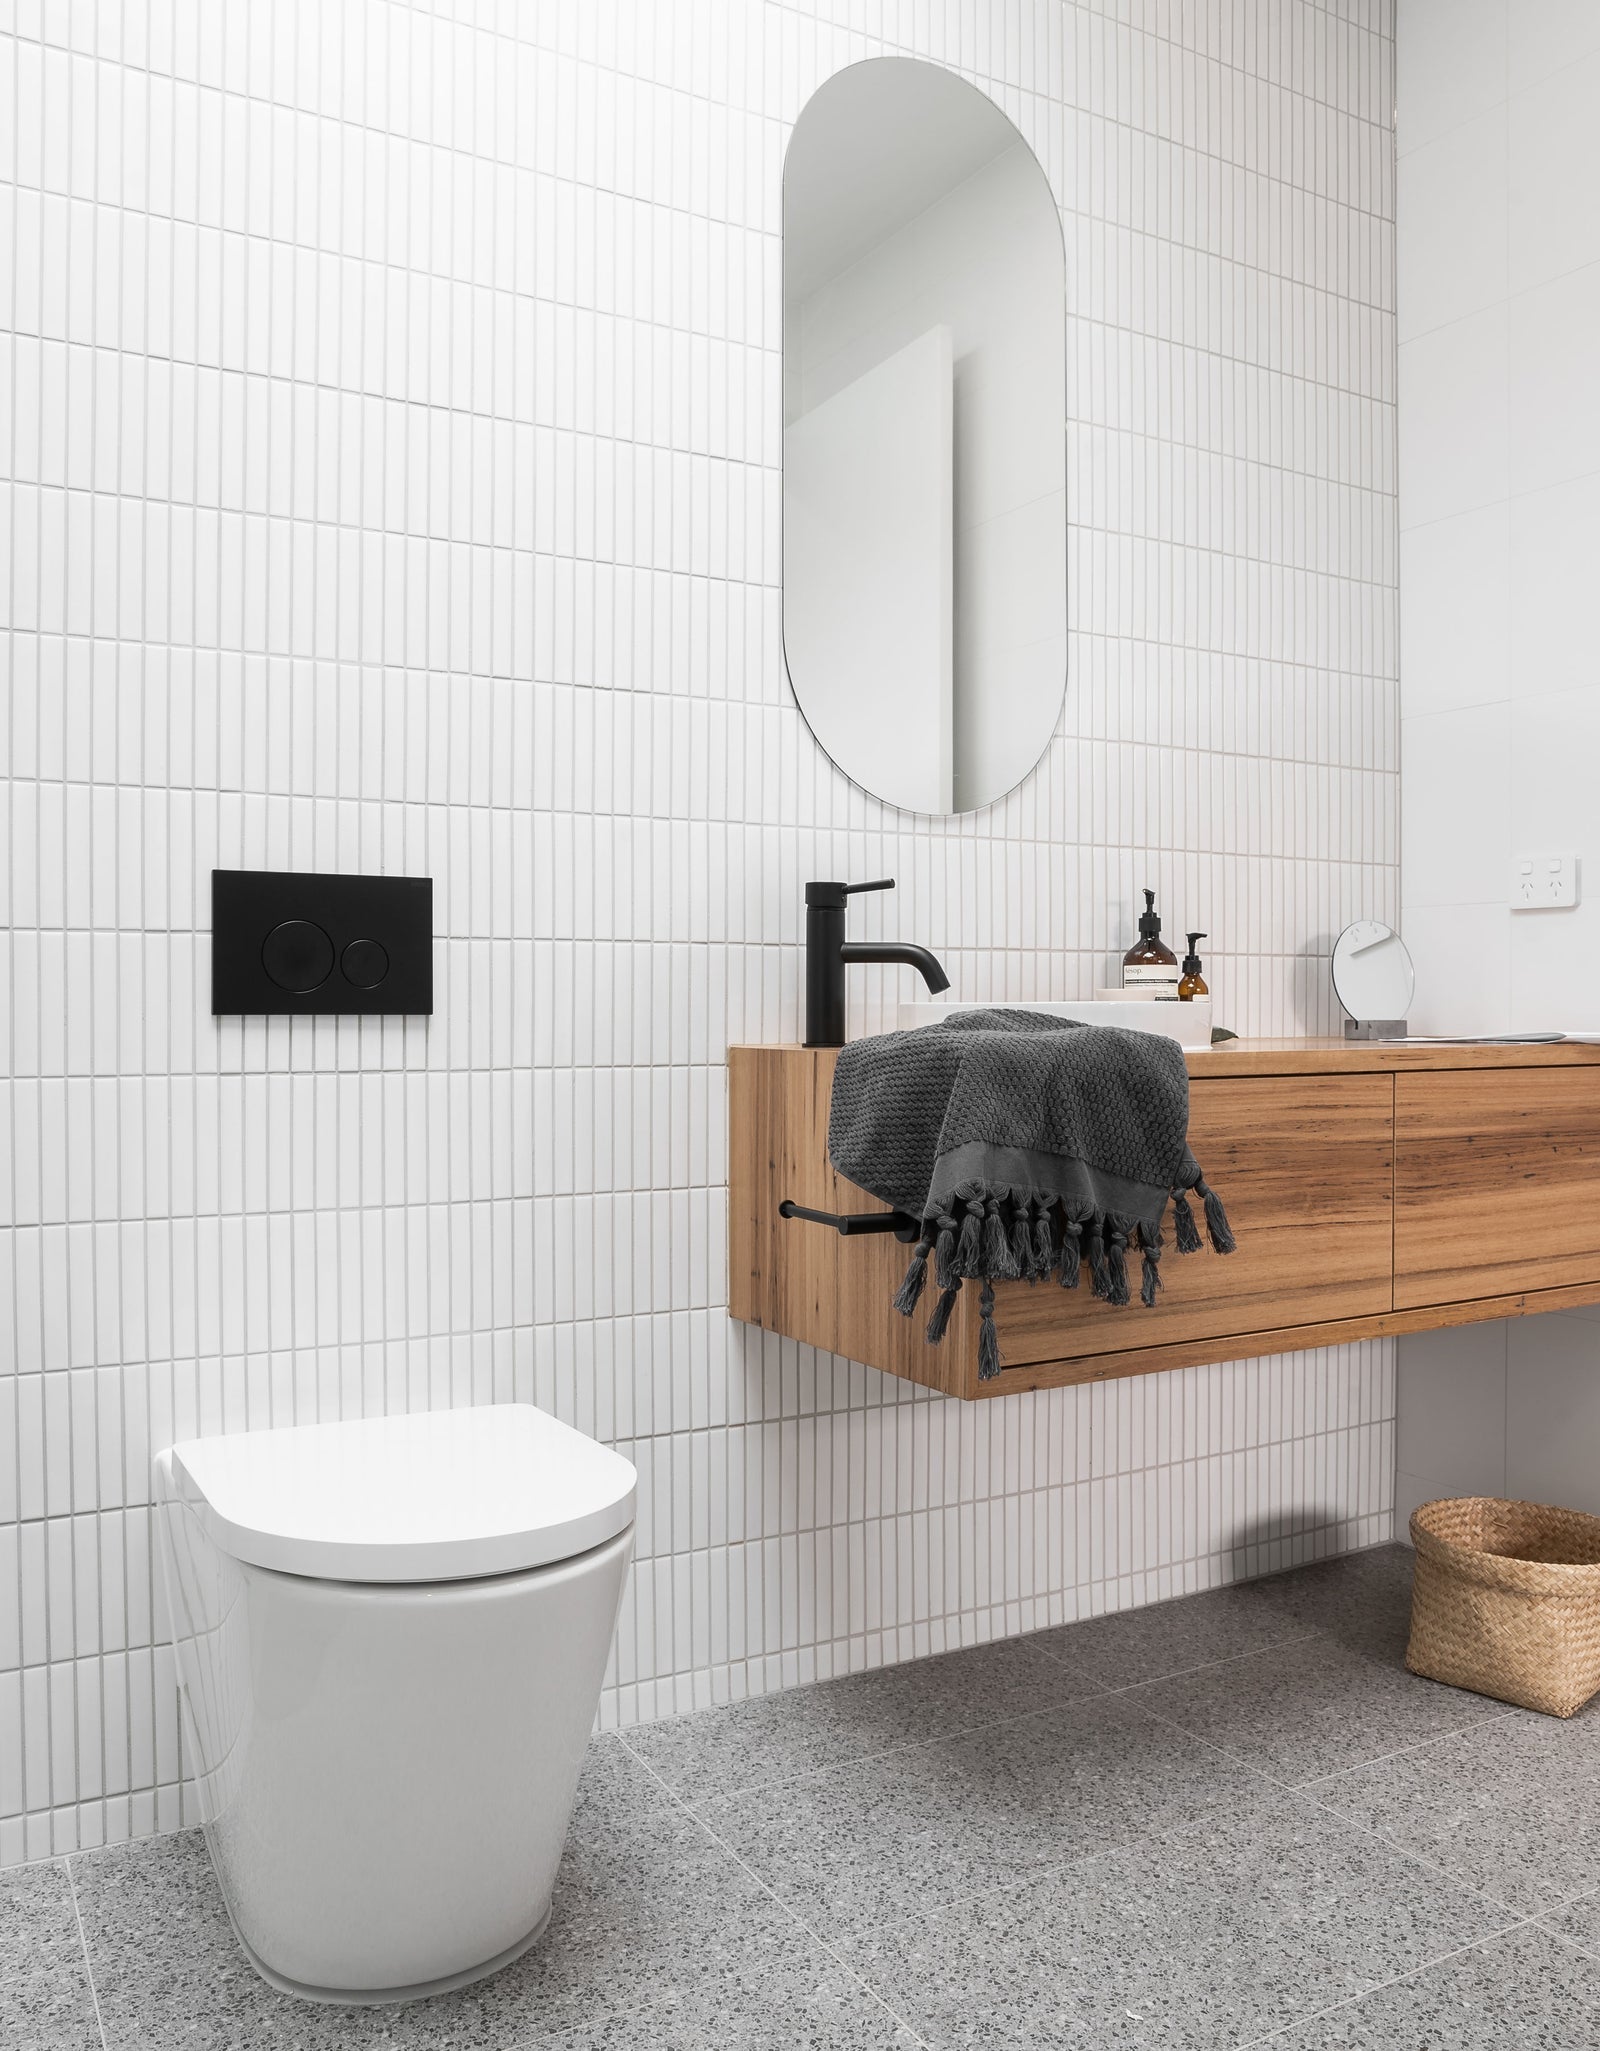 Meir Sigma 21 Dual Flush Plate by Geberit